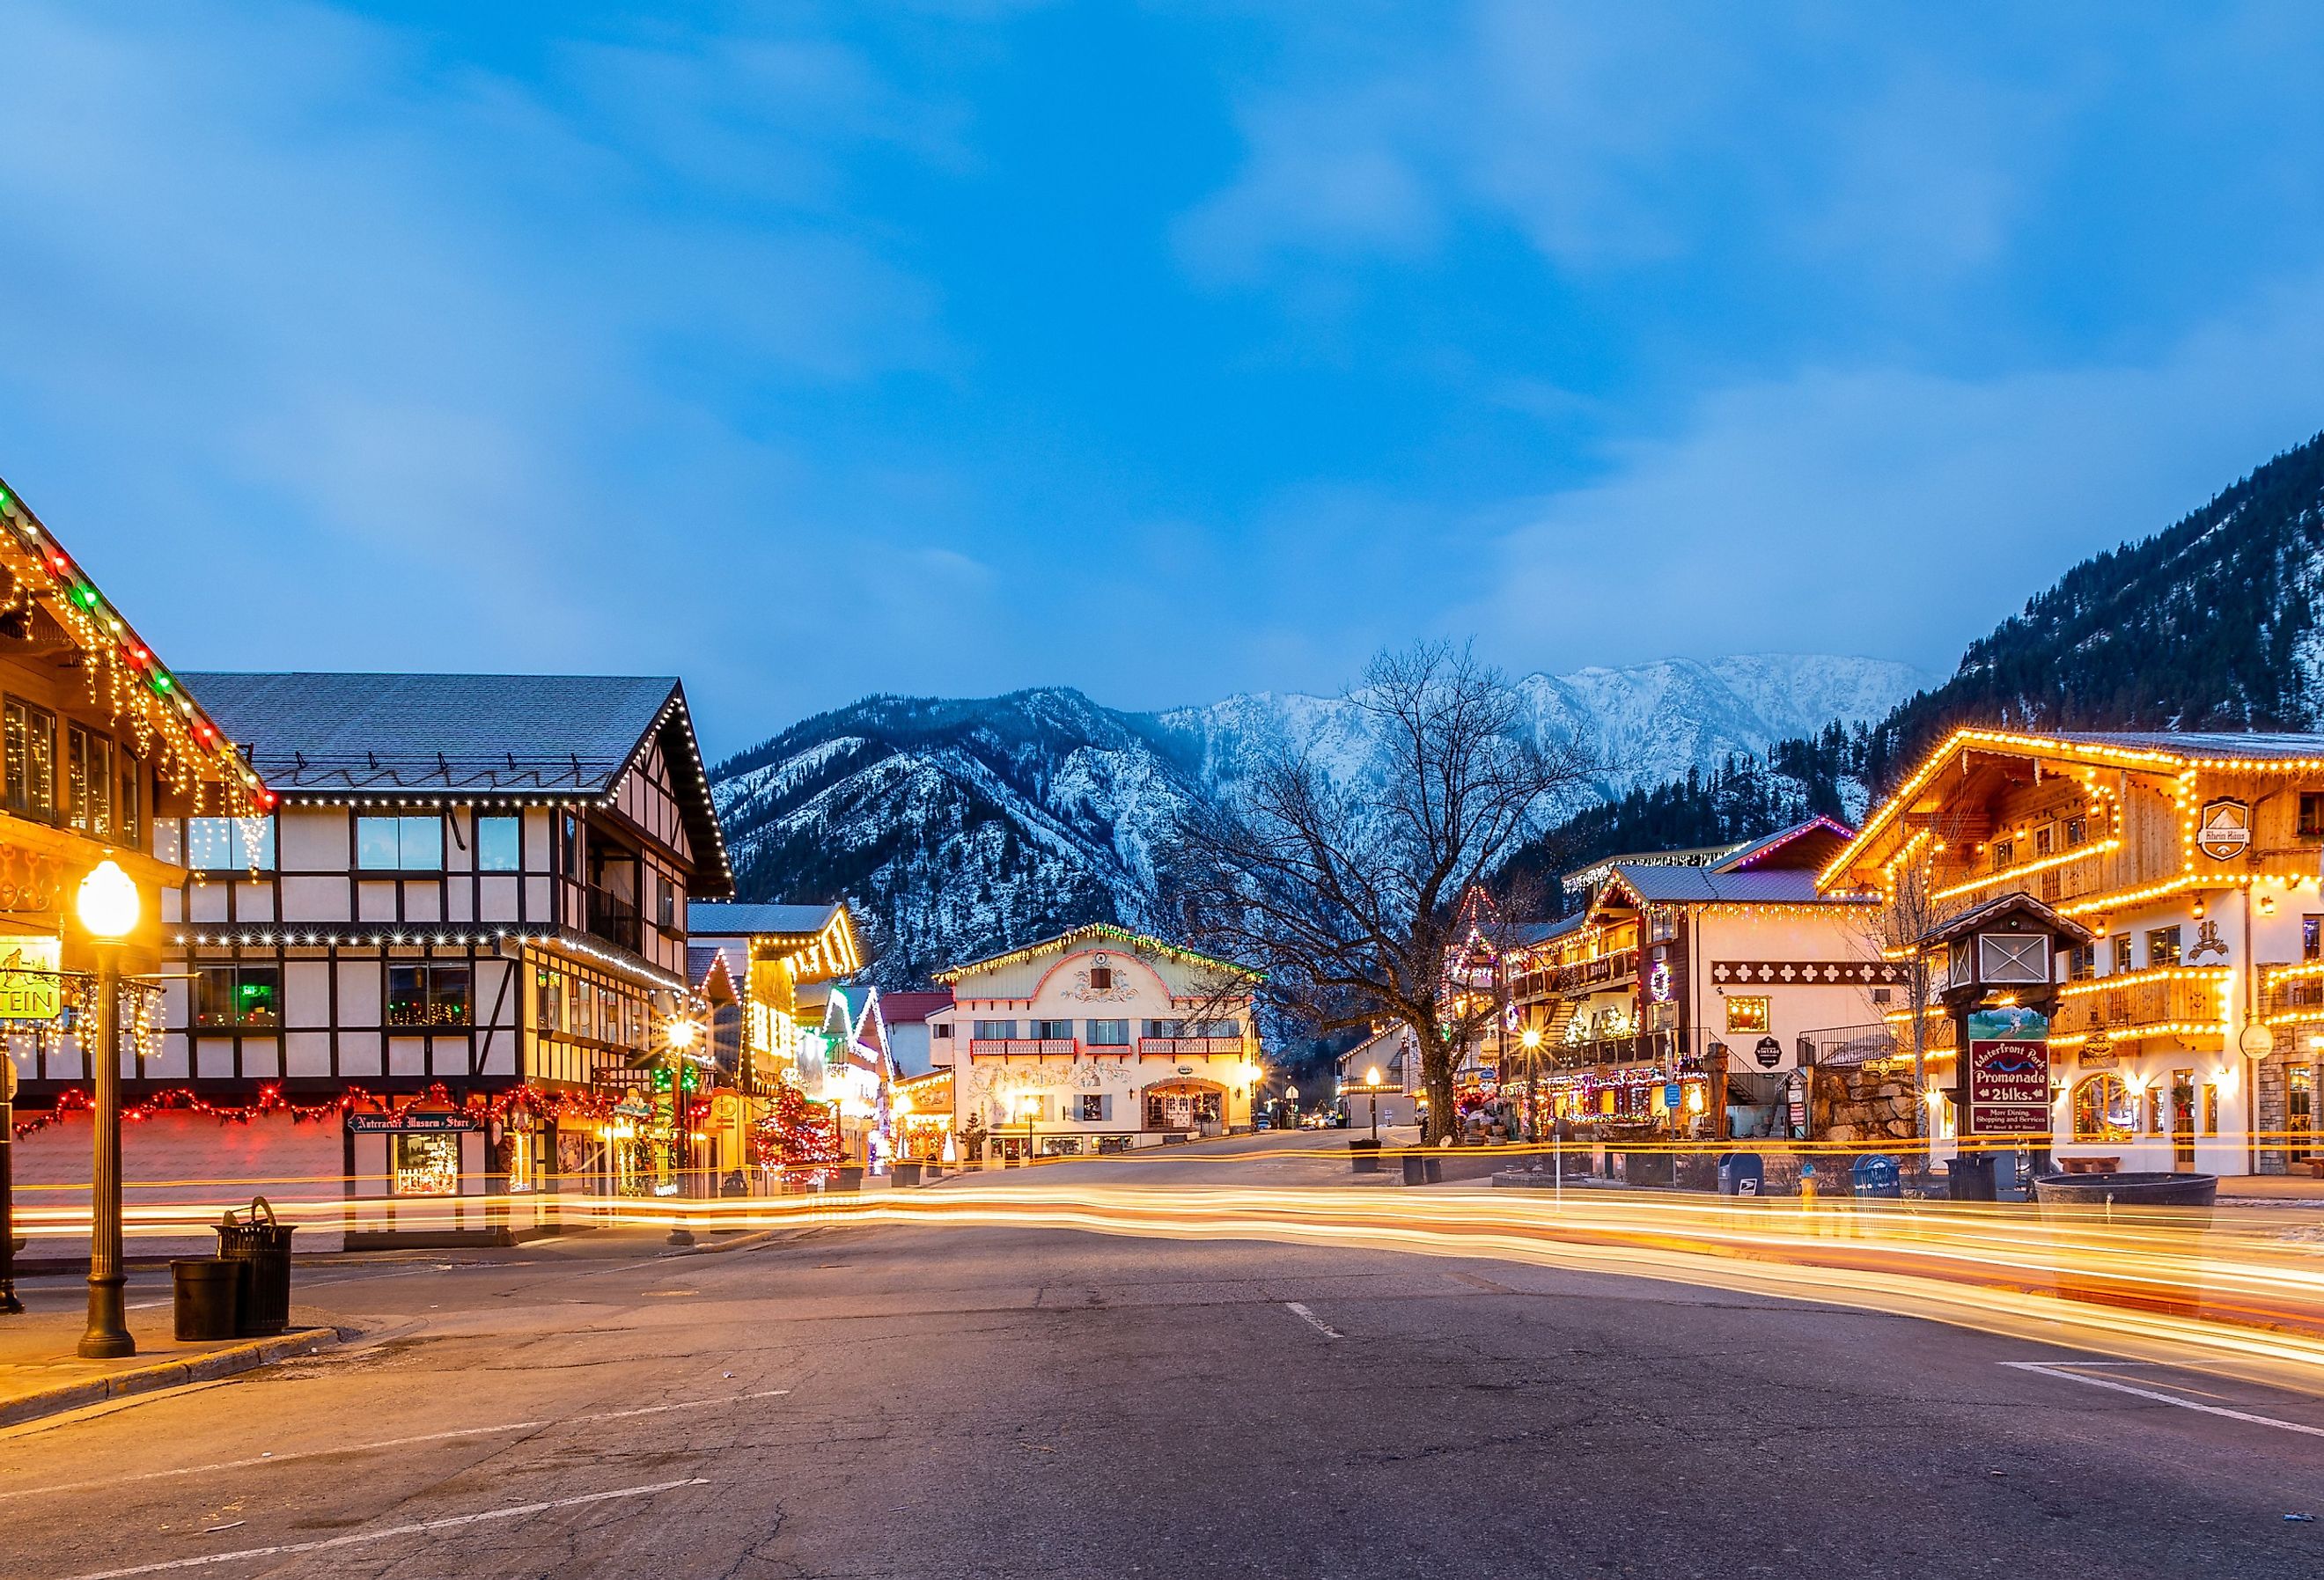 Leavenworth street decorated for the holidays. Image credit Mark A Lee via Shutterstock.